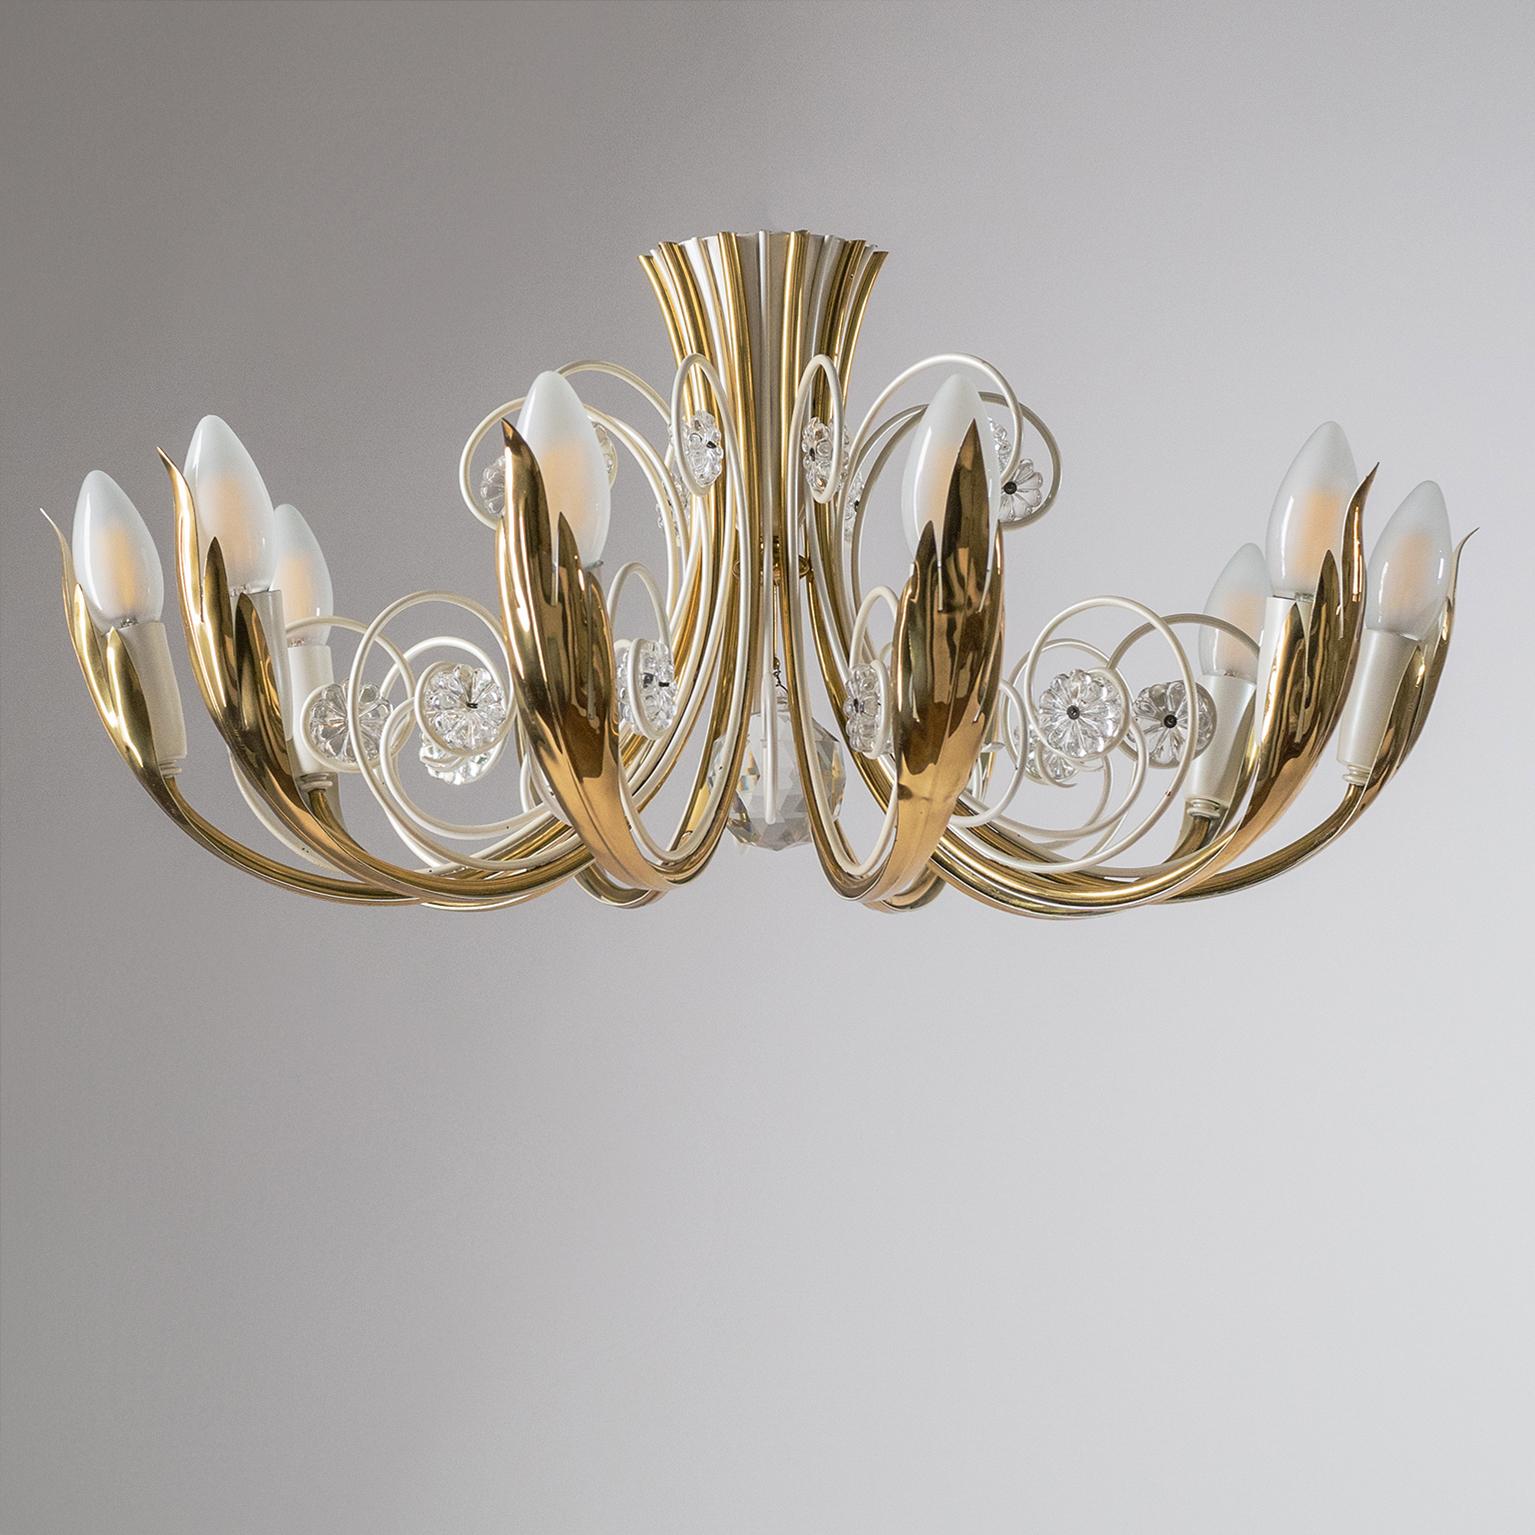 Rare ten-arm semi-flush mount by Vereinigte Werkstätten from the early 1960s. Ten brass arms each morphing into a stylized floral element cradling the socket cover and bulb. In between are pearly-white lacquered elements with glass flowers and a